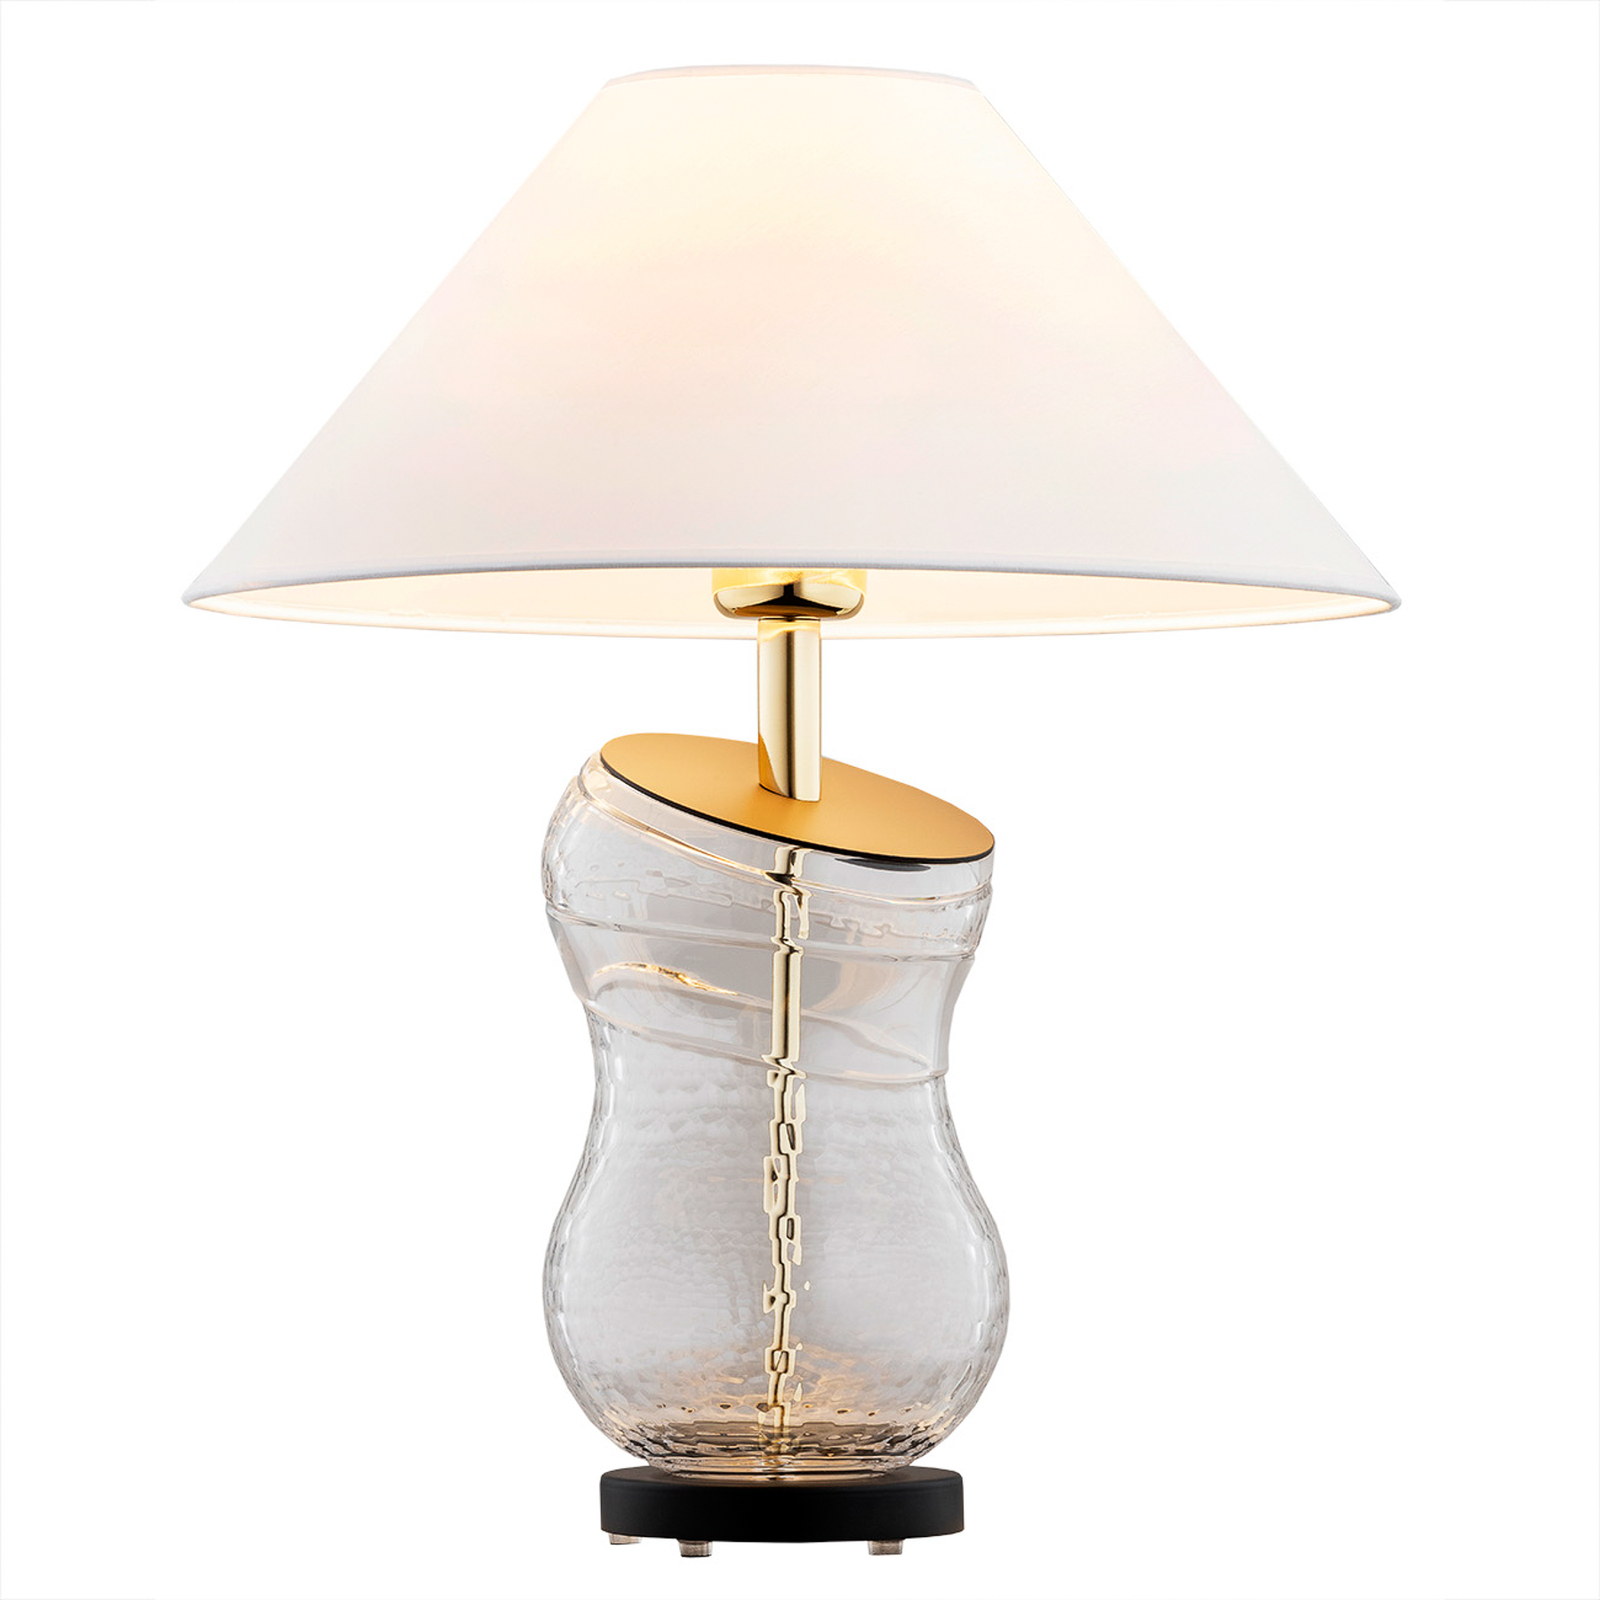 Veneto table lamp with textile shade in white